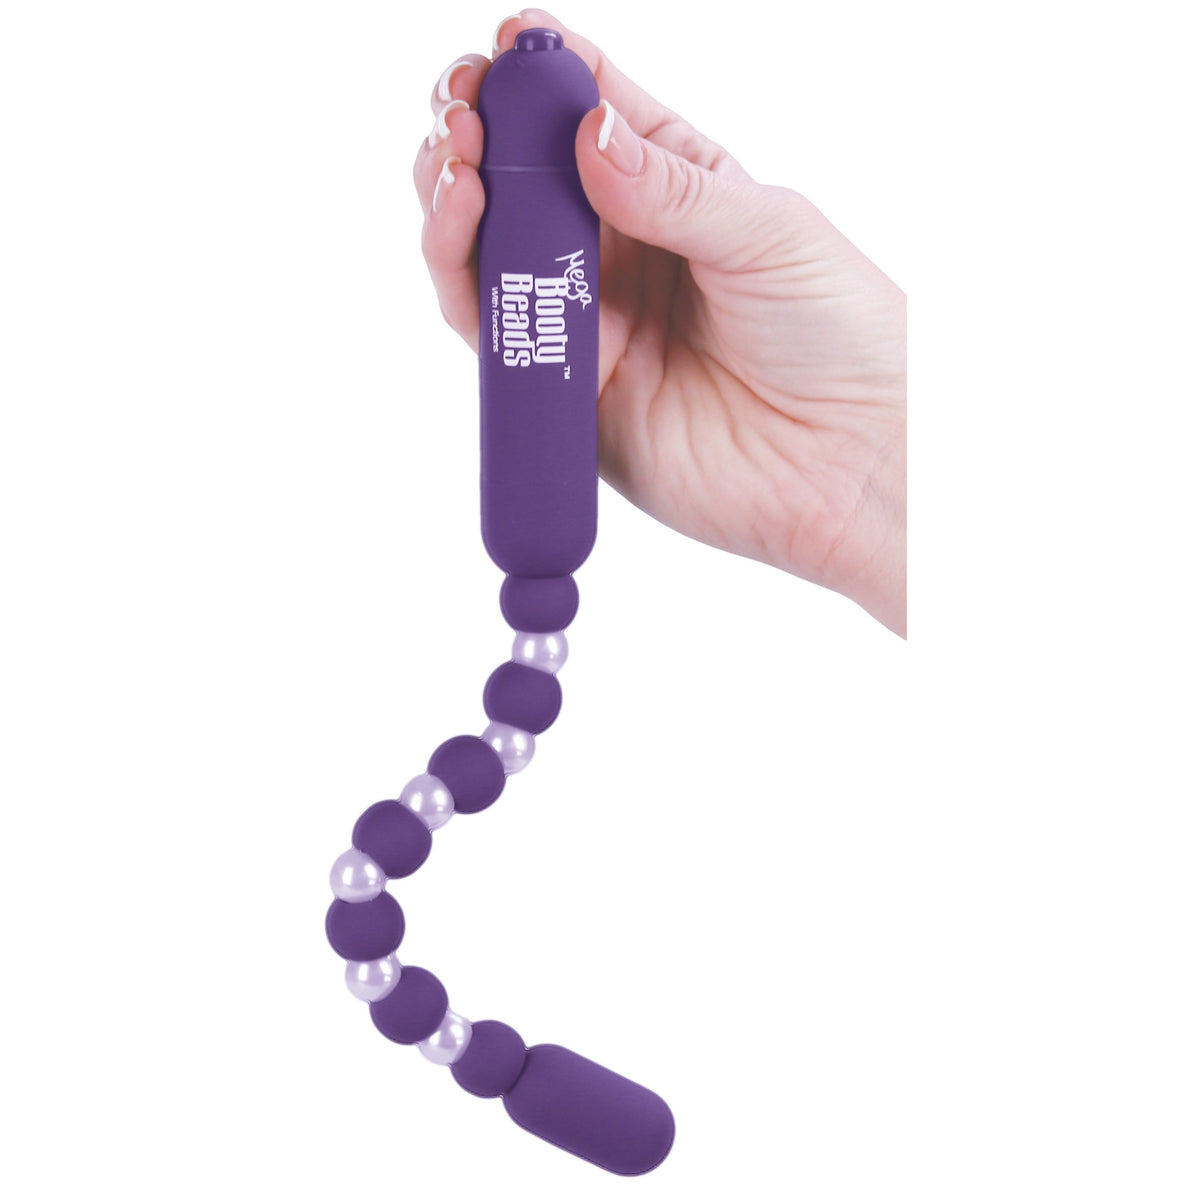 Power Bullet Mega Booty Beads with 7 Functions - Violet - Thorn & Feather Sex Toy Canada